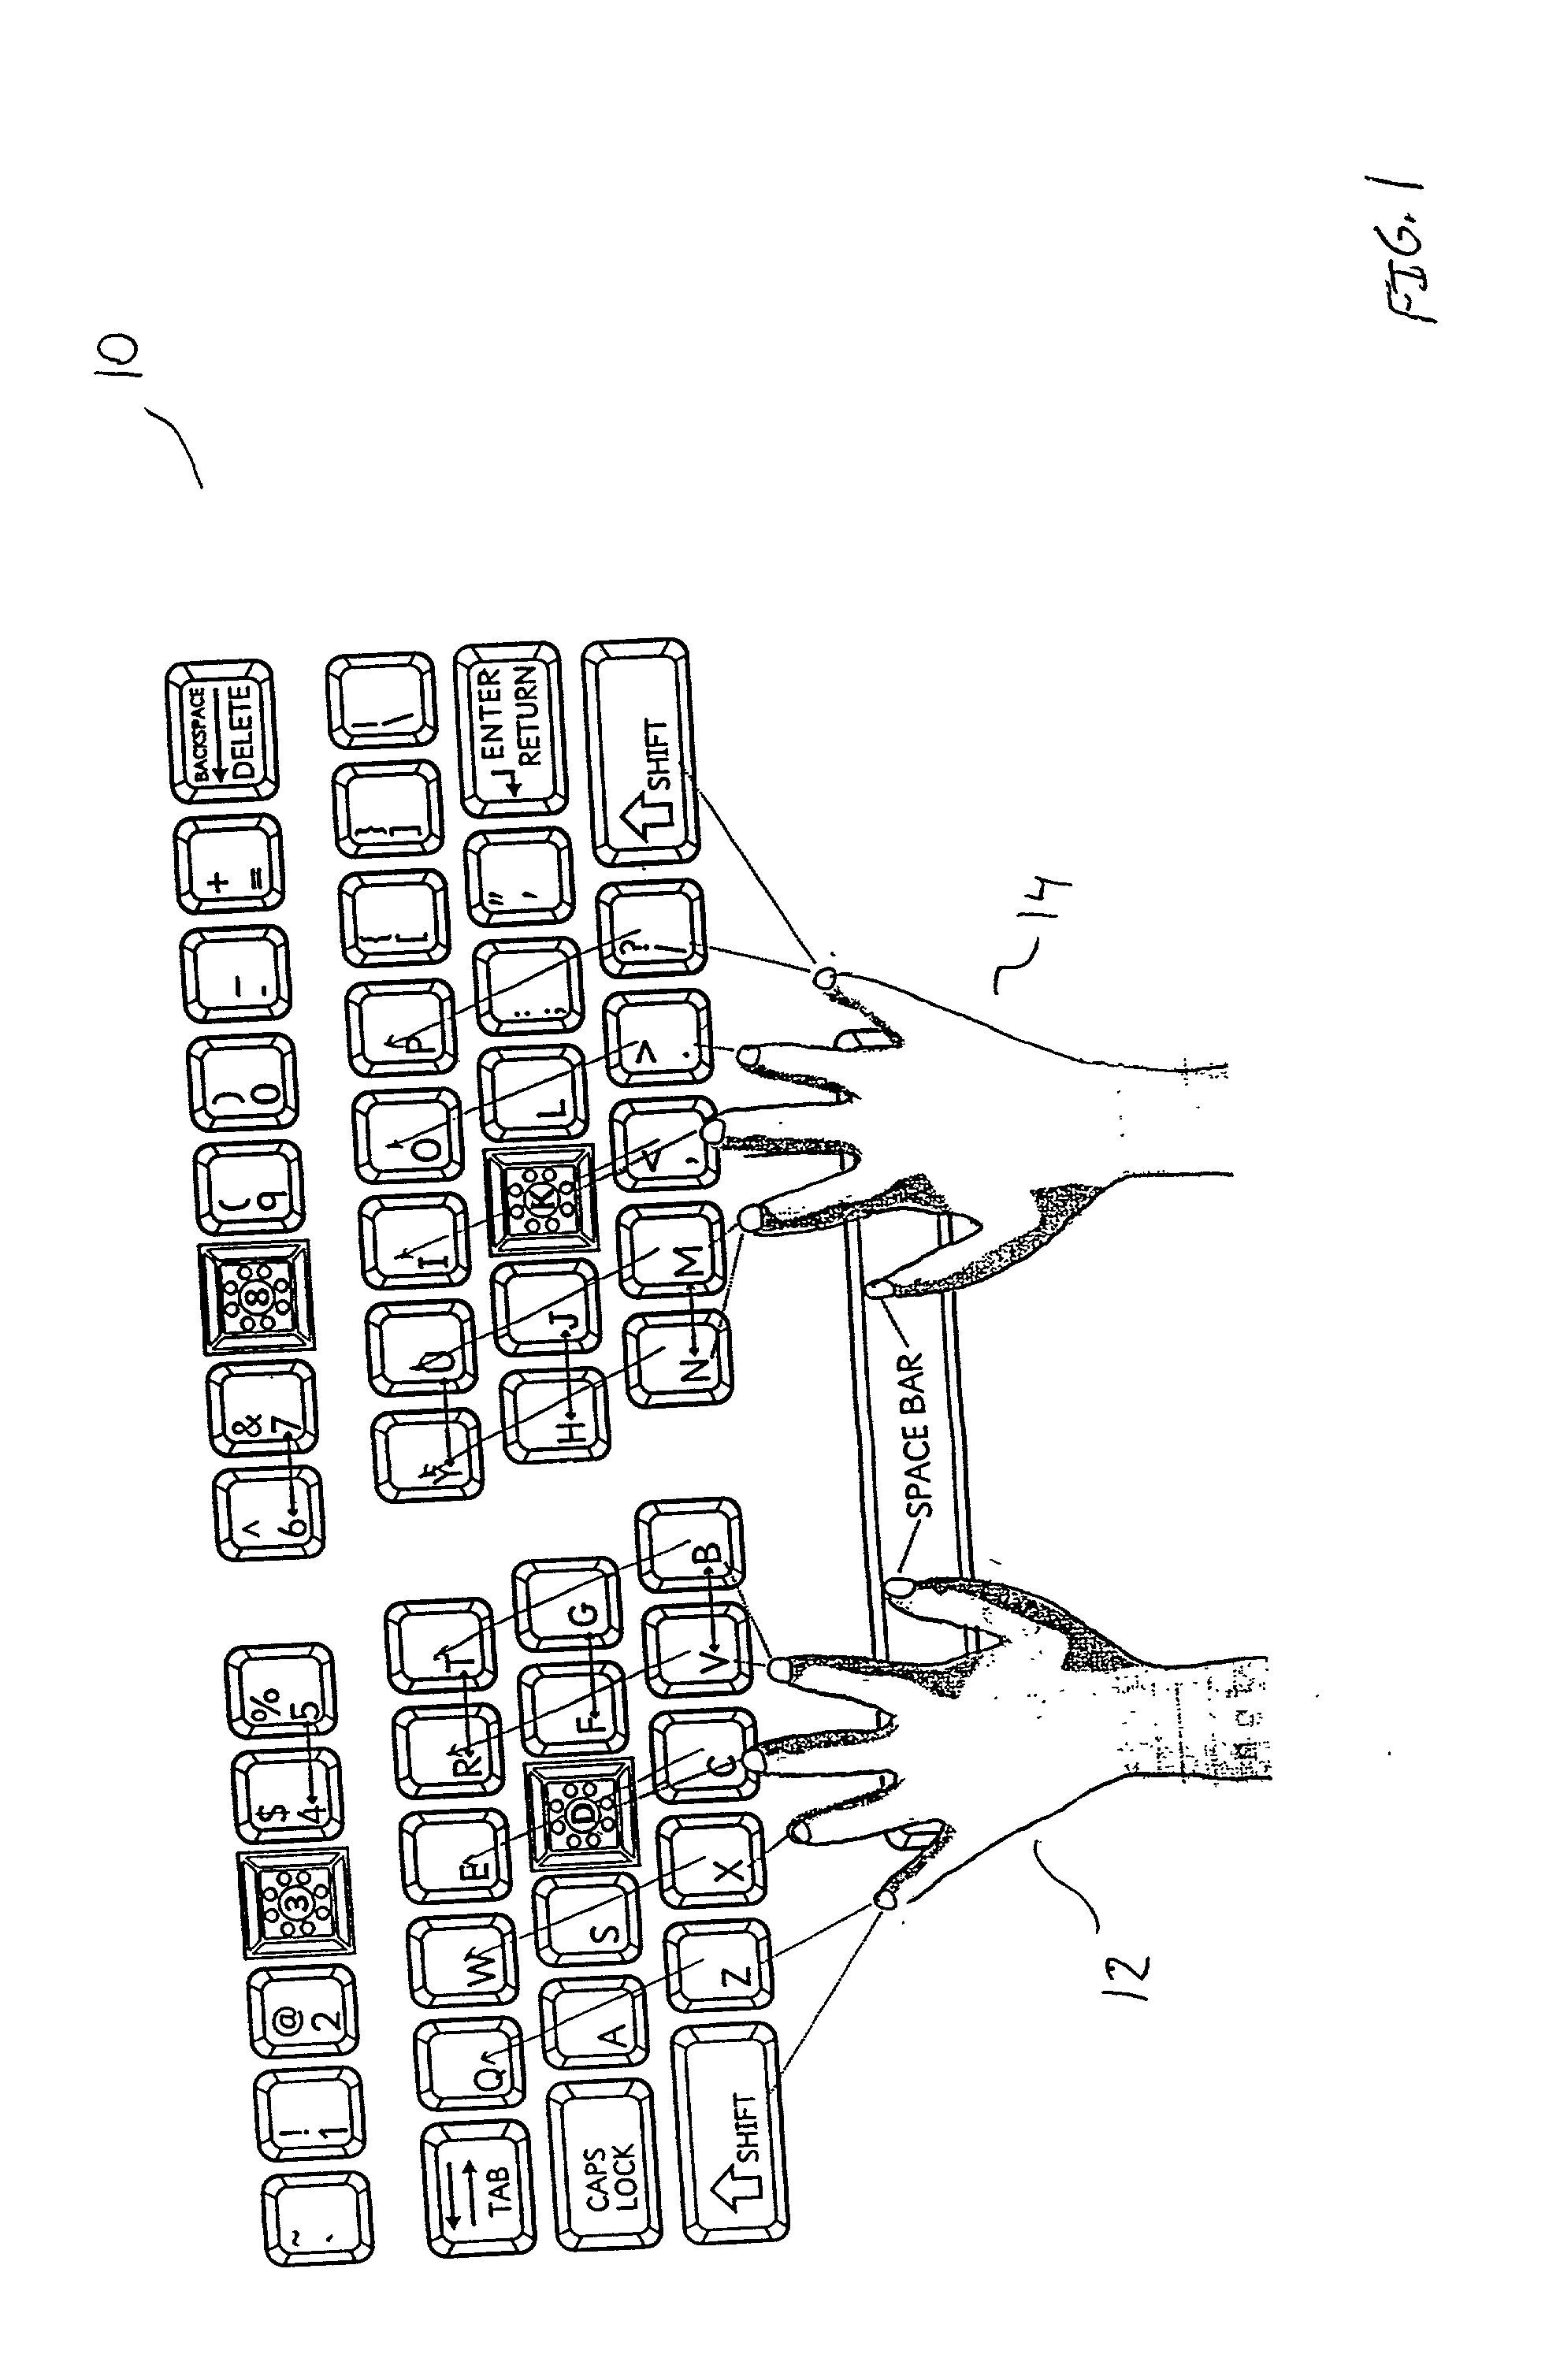 Method and apparatus for teaching computer keyboarding